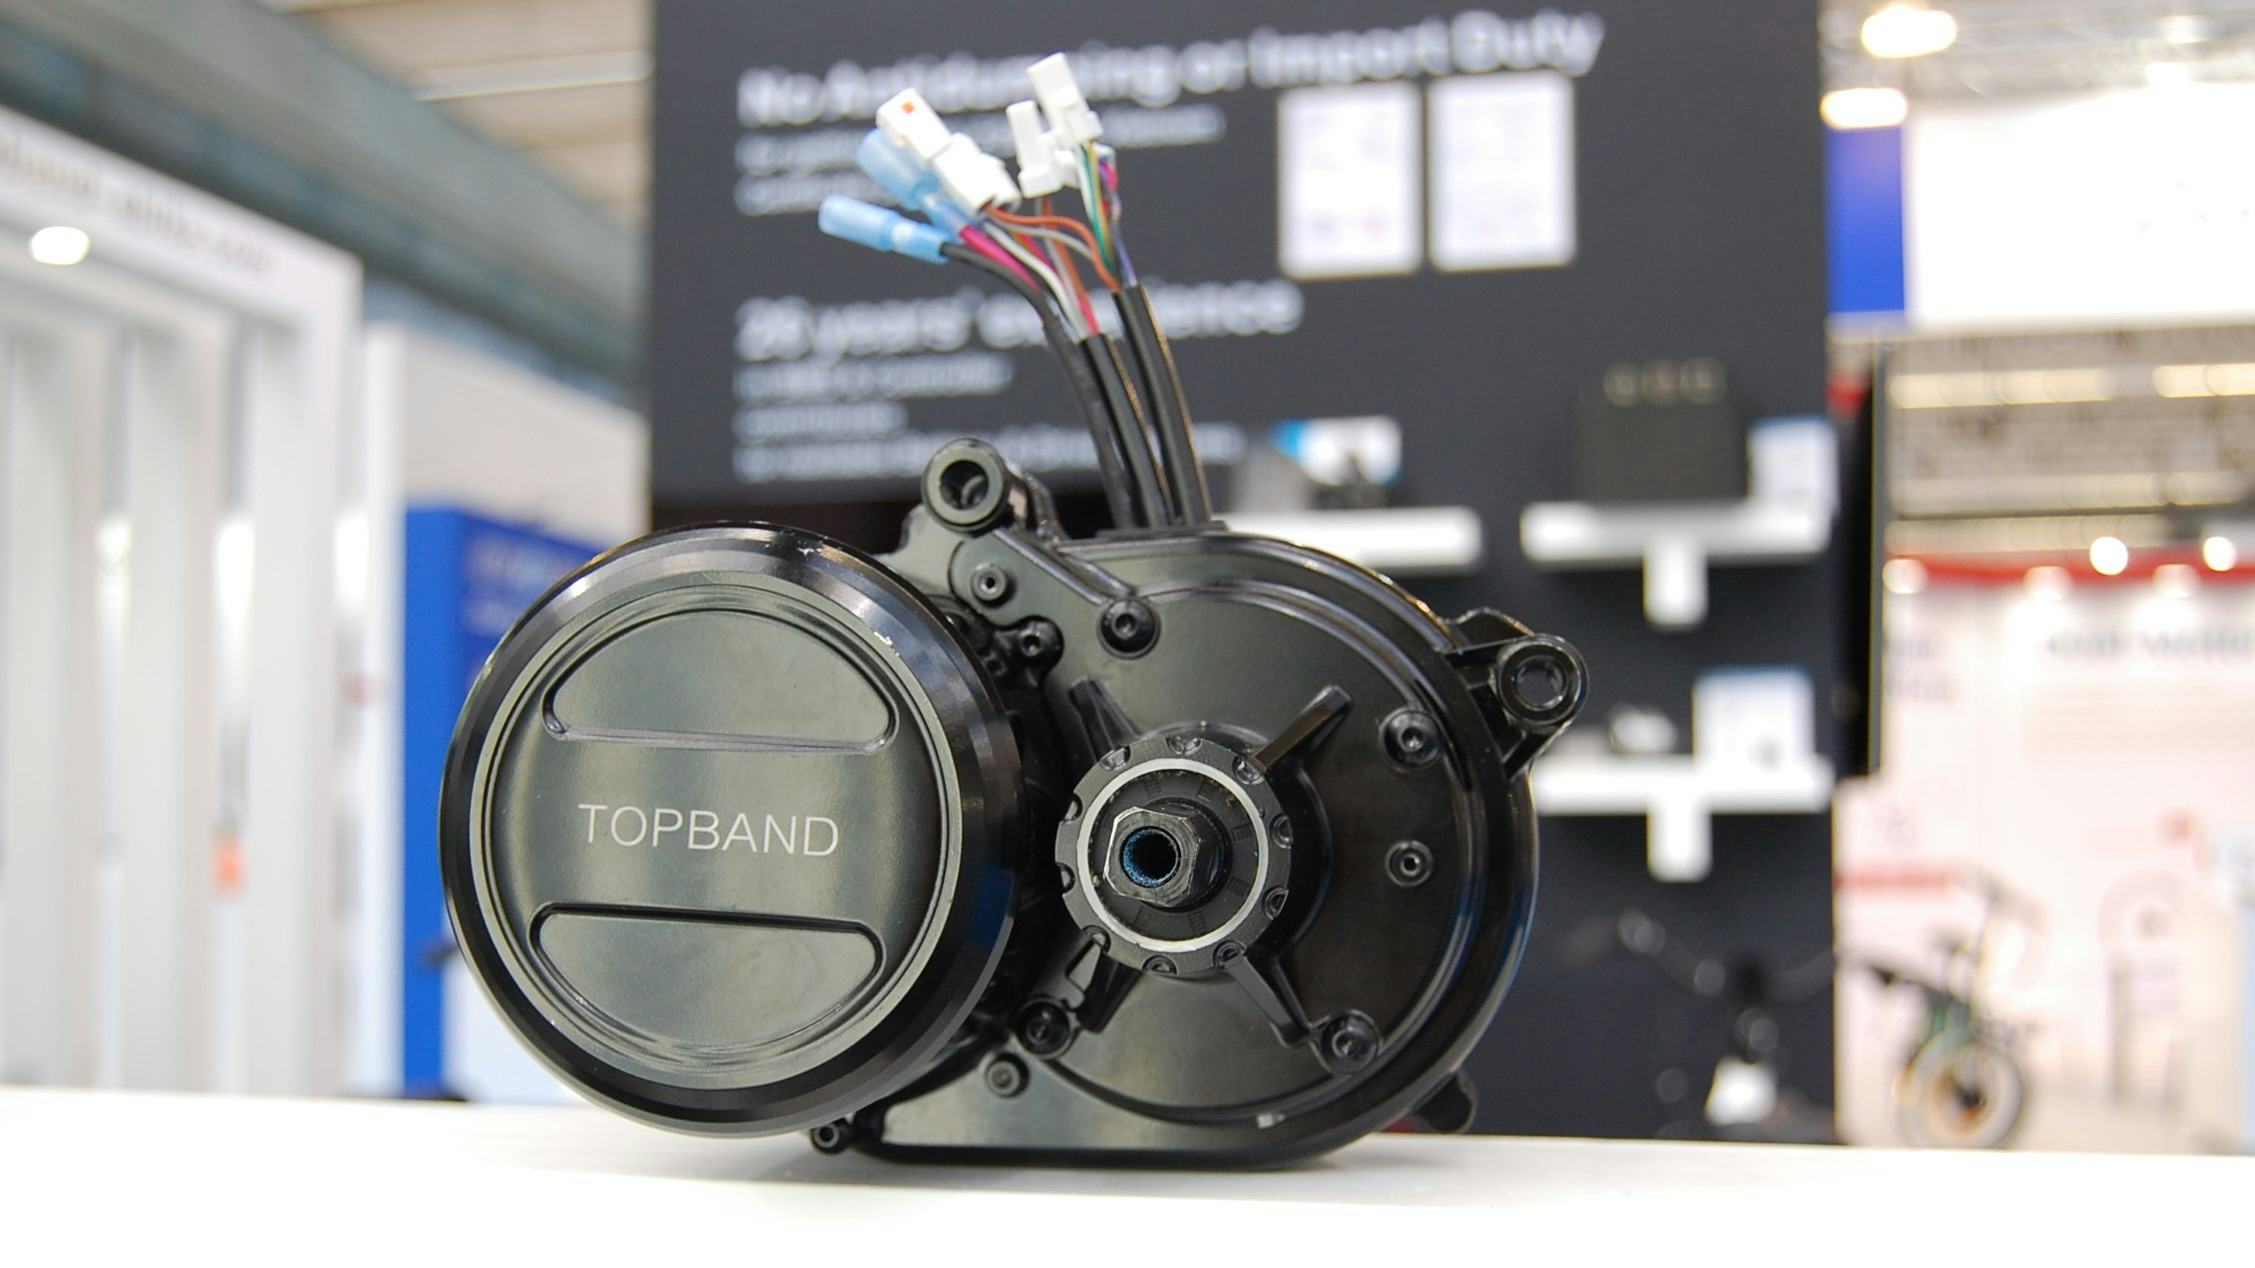 Known for its range of e-bike batteries, Topband has brought an e-bike motor to the market for the first time. – Photo Bike Europe